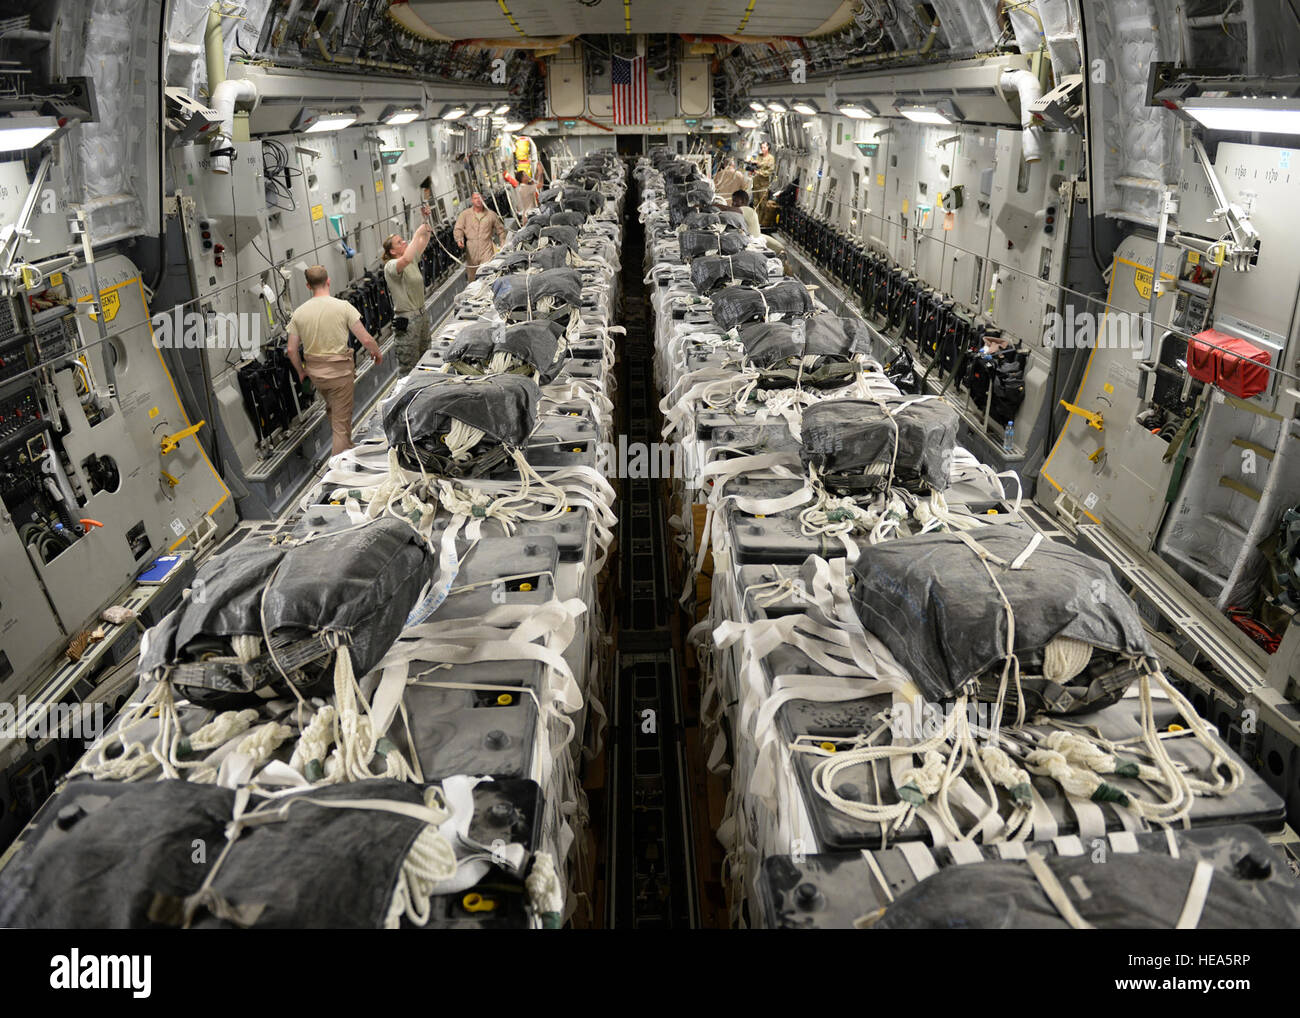 U.S. Army 11th Quartermaster Company parachute riggers assemble 40 container delivery system bundles of water onto a C-17 Globemaster III for a humanitarian airdrop over the area if Amirli, Iraq Aug. 30, 2014. Two C-17s dropped 79 bundles of fresh drinking water totaling 7,513 gallons. In addition, two C-130 Hercules dropped 30 bundles containing 3,032 gallons of water and 7,056 Halal Meals Ready to Eat.  Staff Sgt. Shawn Nickel) Stock Photo